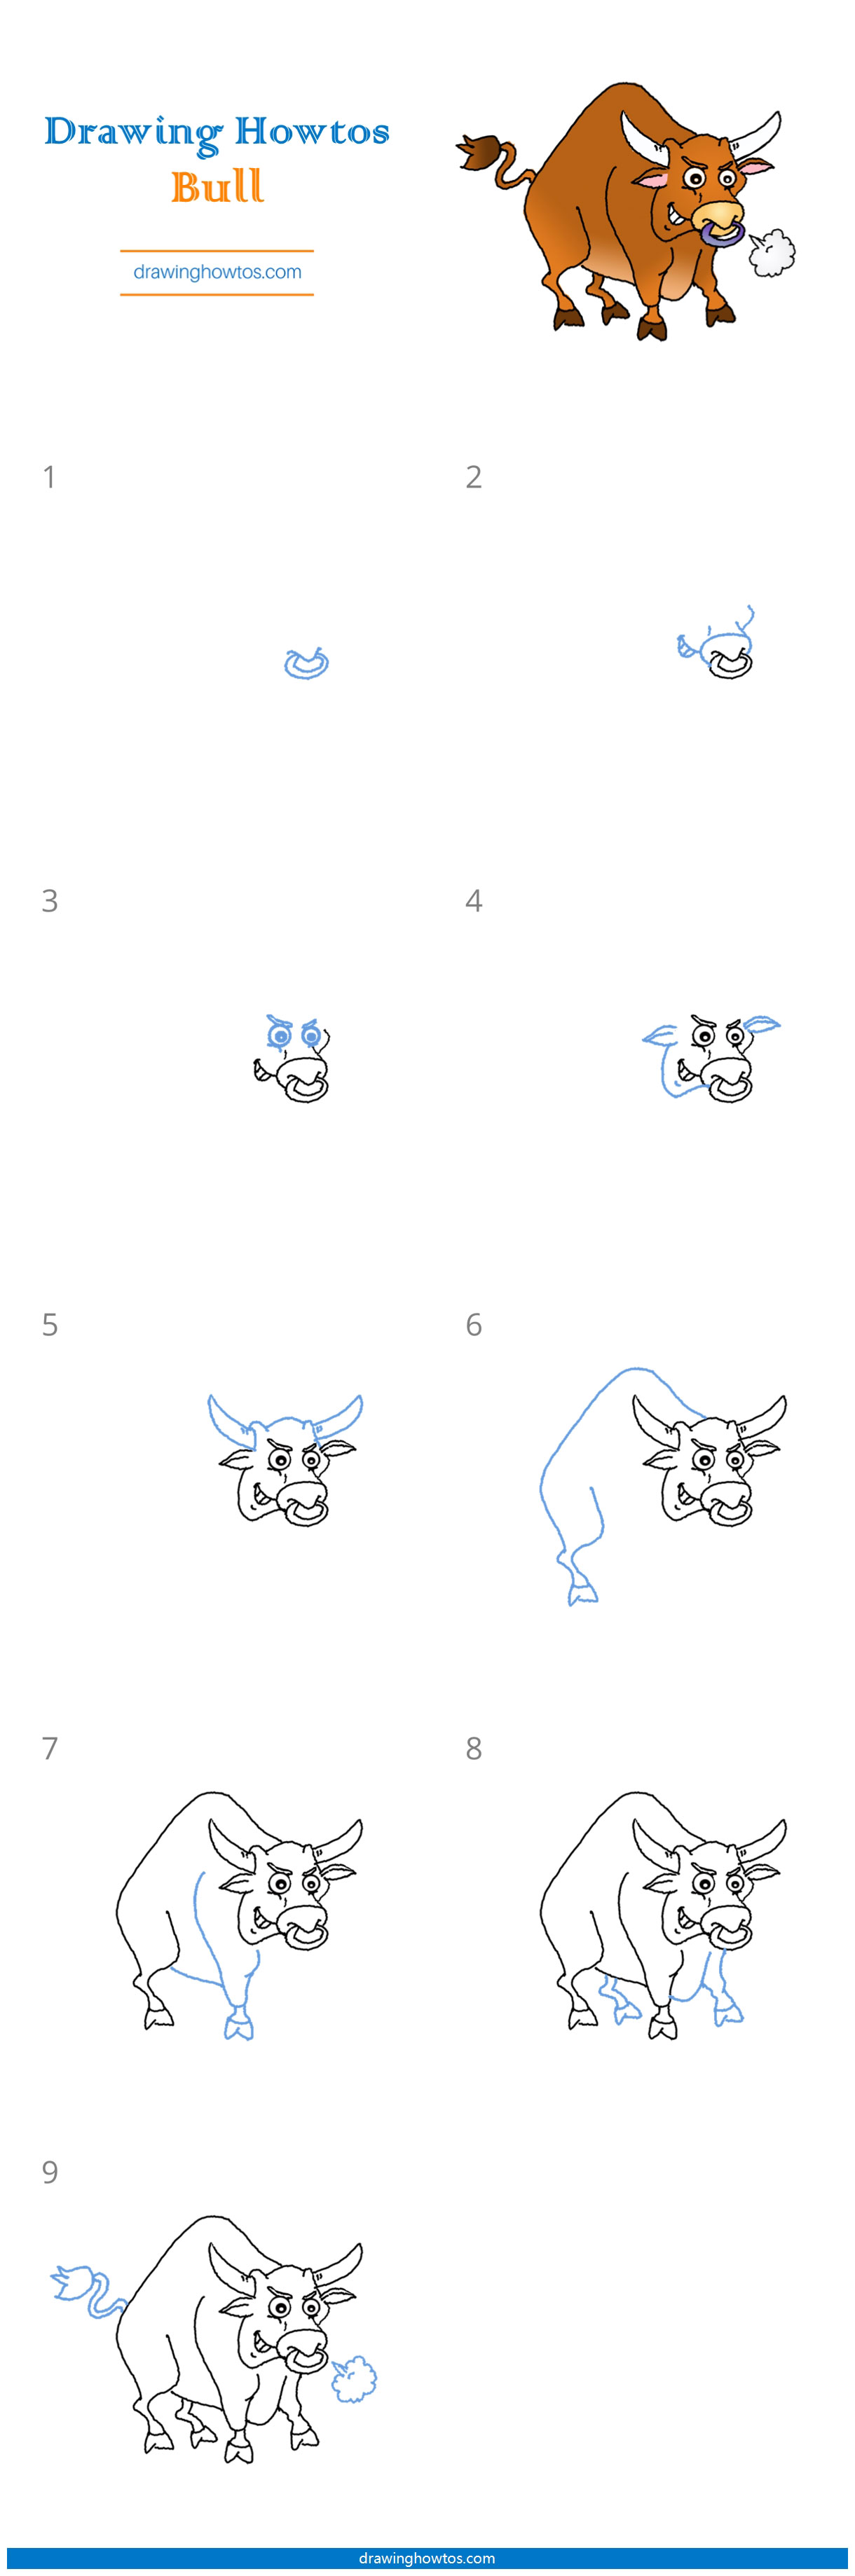 How to Draw an Angry Bull Step by Step